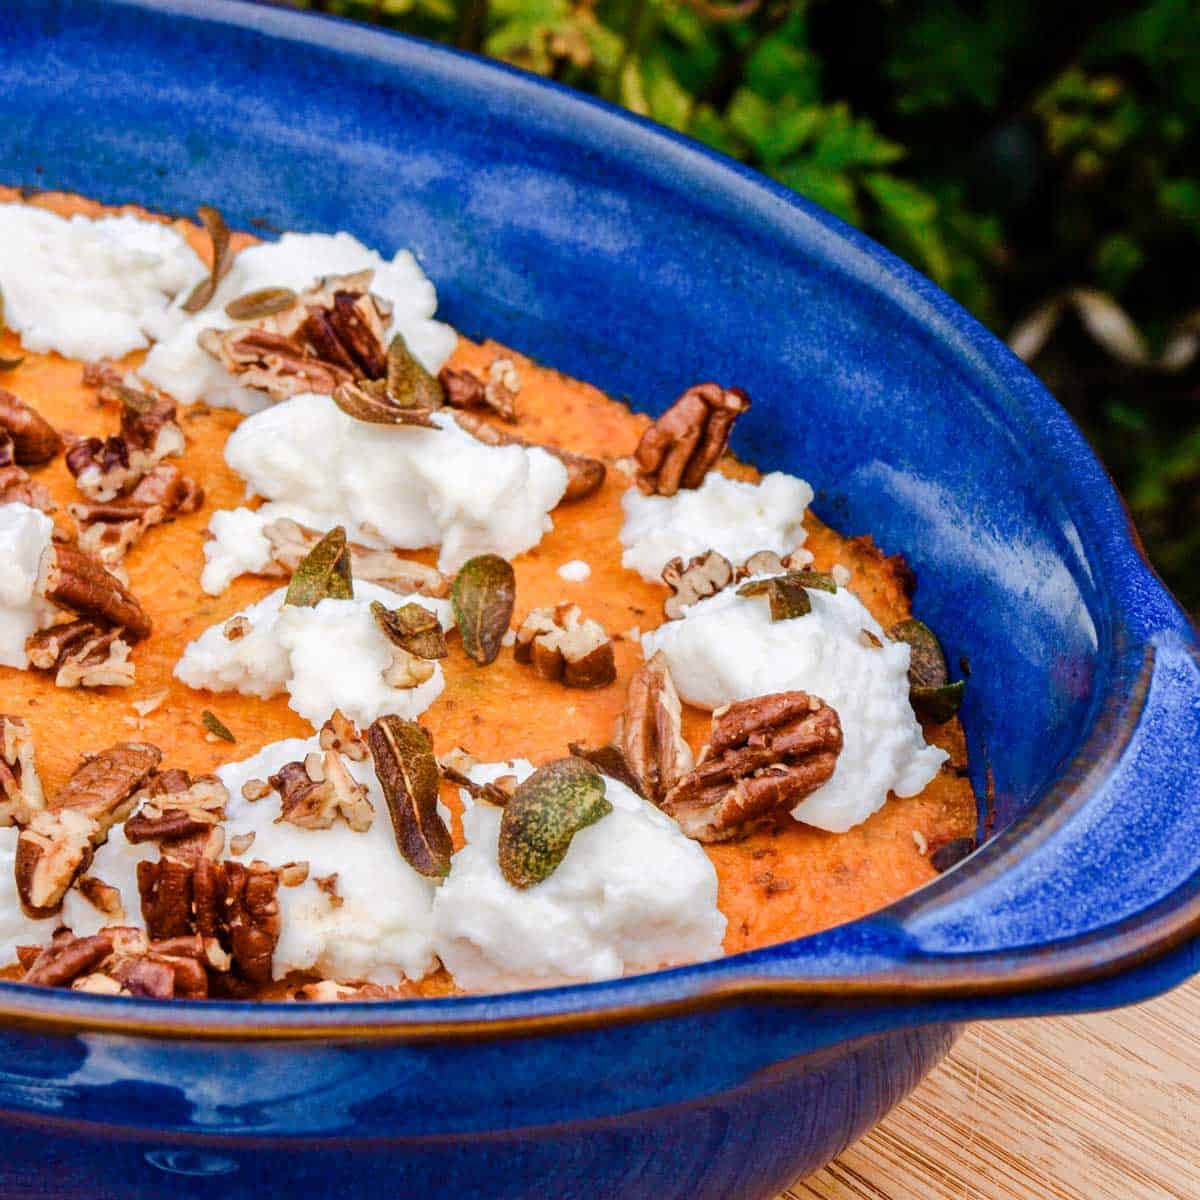 Blue serving dish of Sweet Potato Mash with ricotta, sage and pecan nuts.